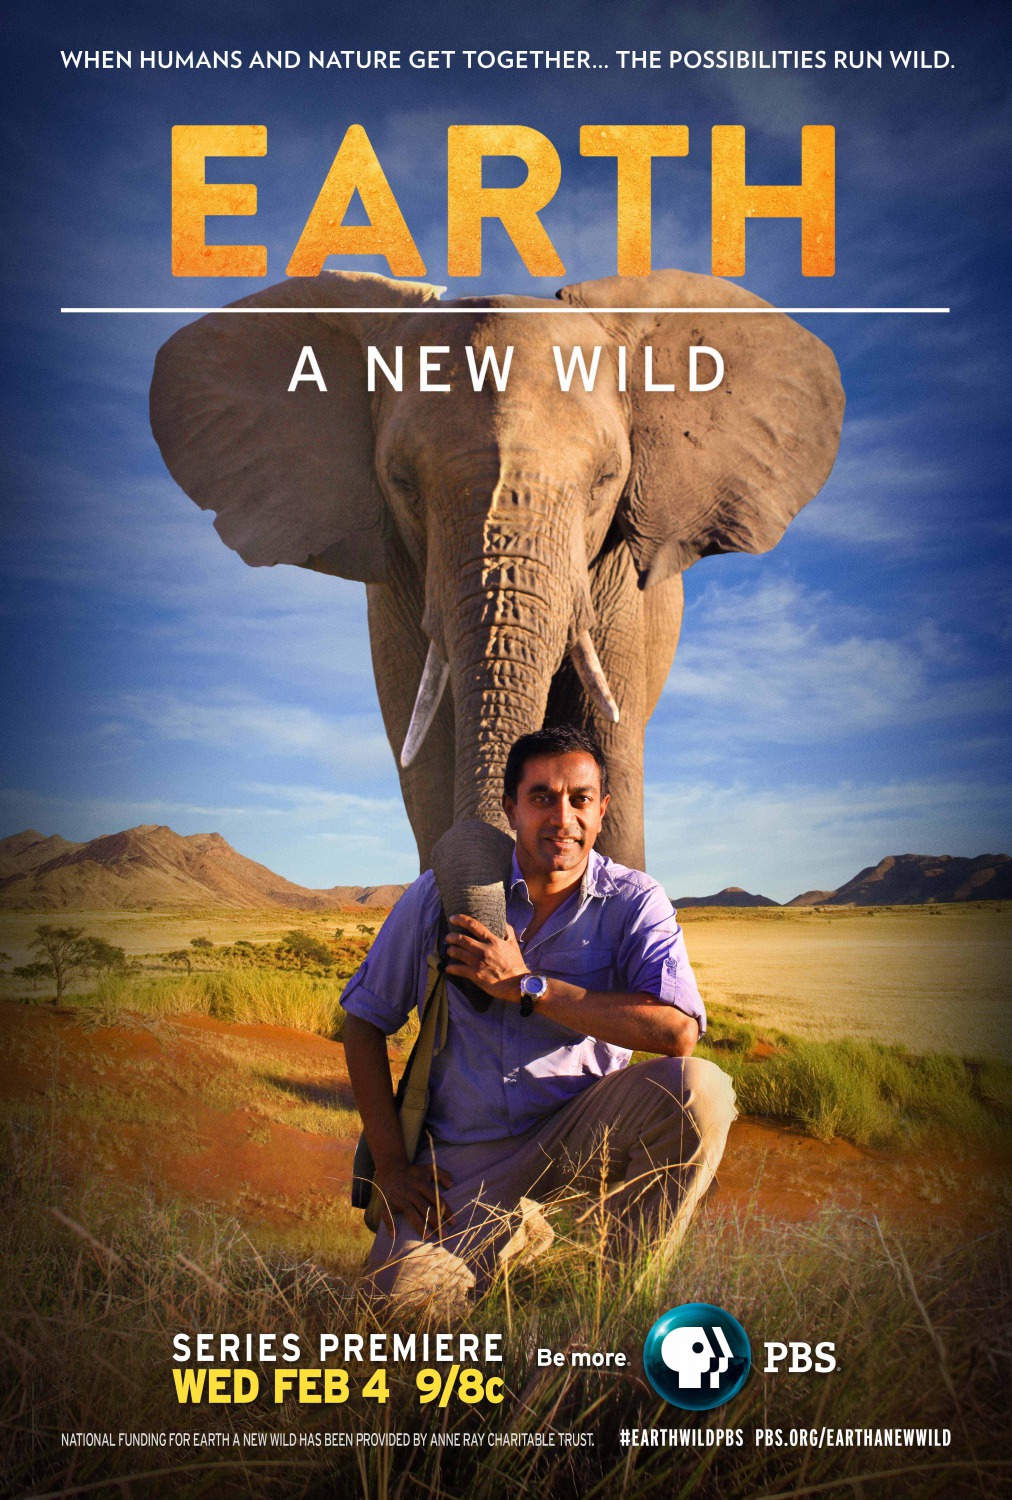 Extra Large TV Poster Image for EARTH a New Wild 